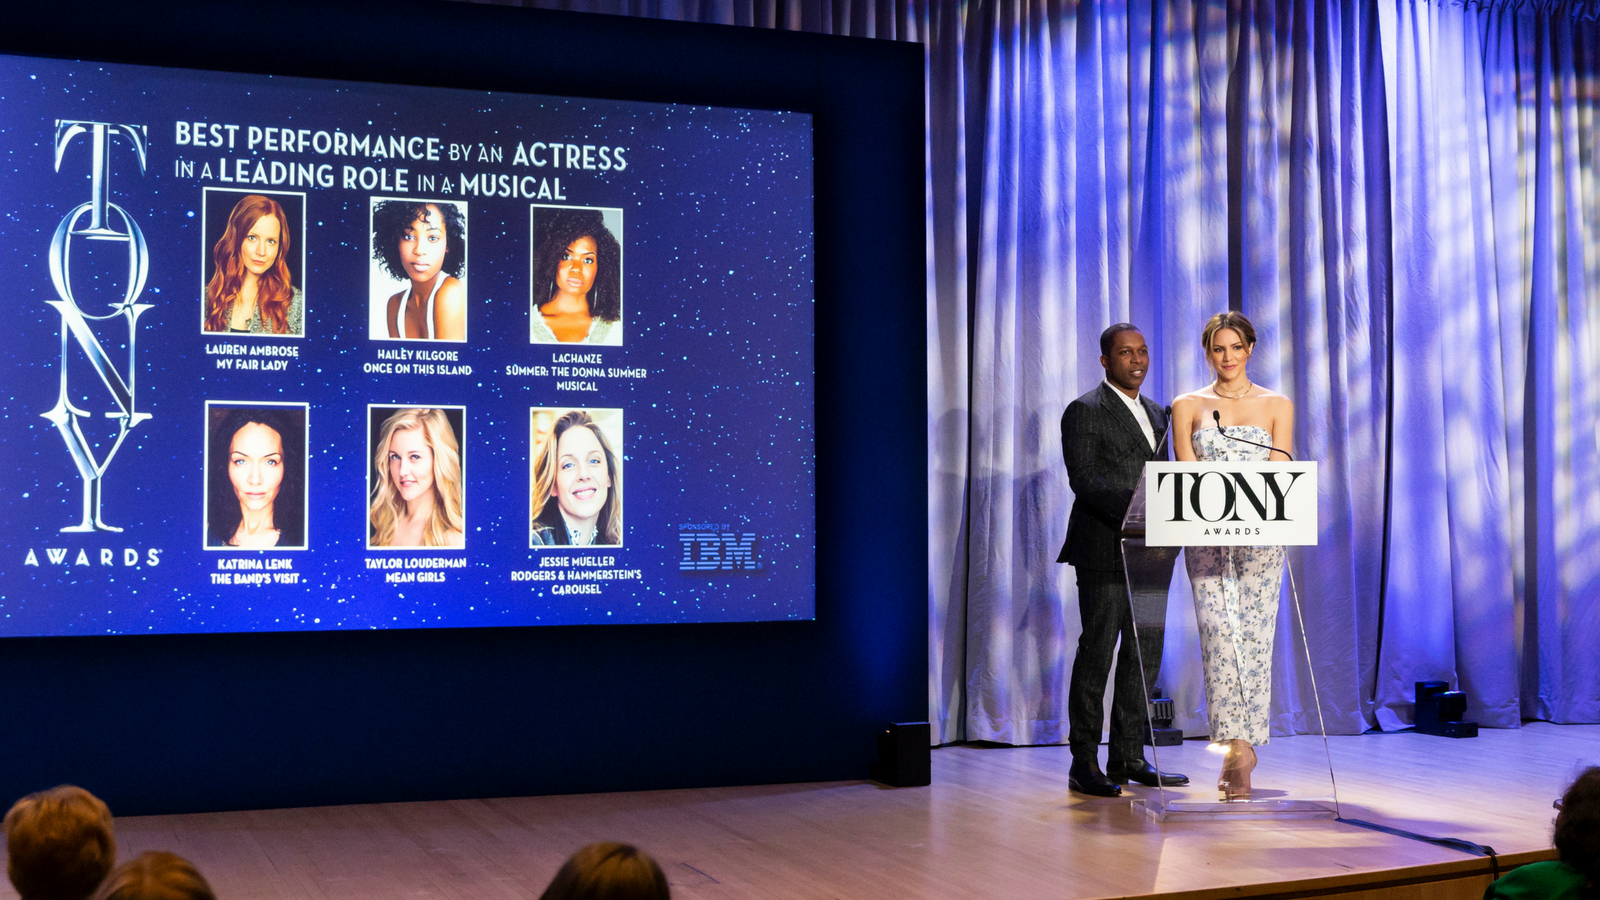 Broadway stars Leslie Odom Jr. and Katharine McPhee speak onstage during 2018 Tony Awards nominations announcement in May. Photo via Shutterstock.com